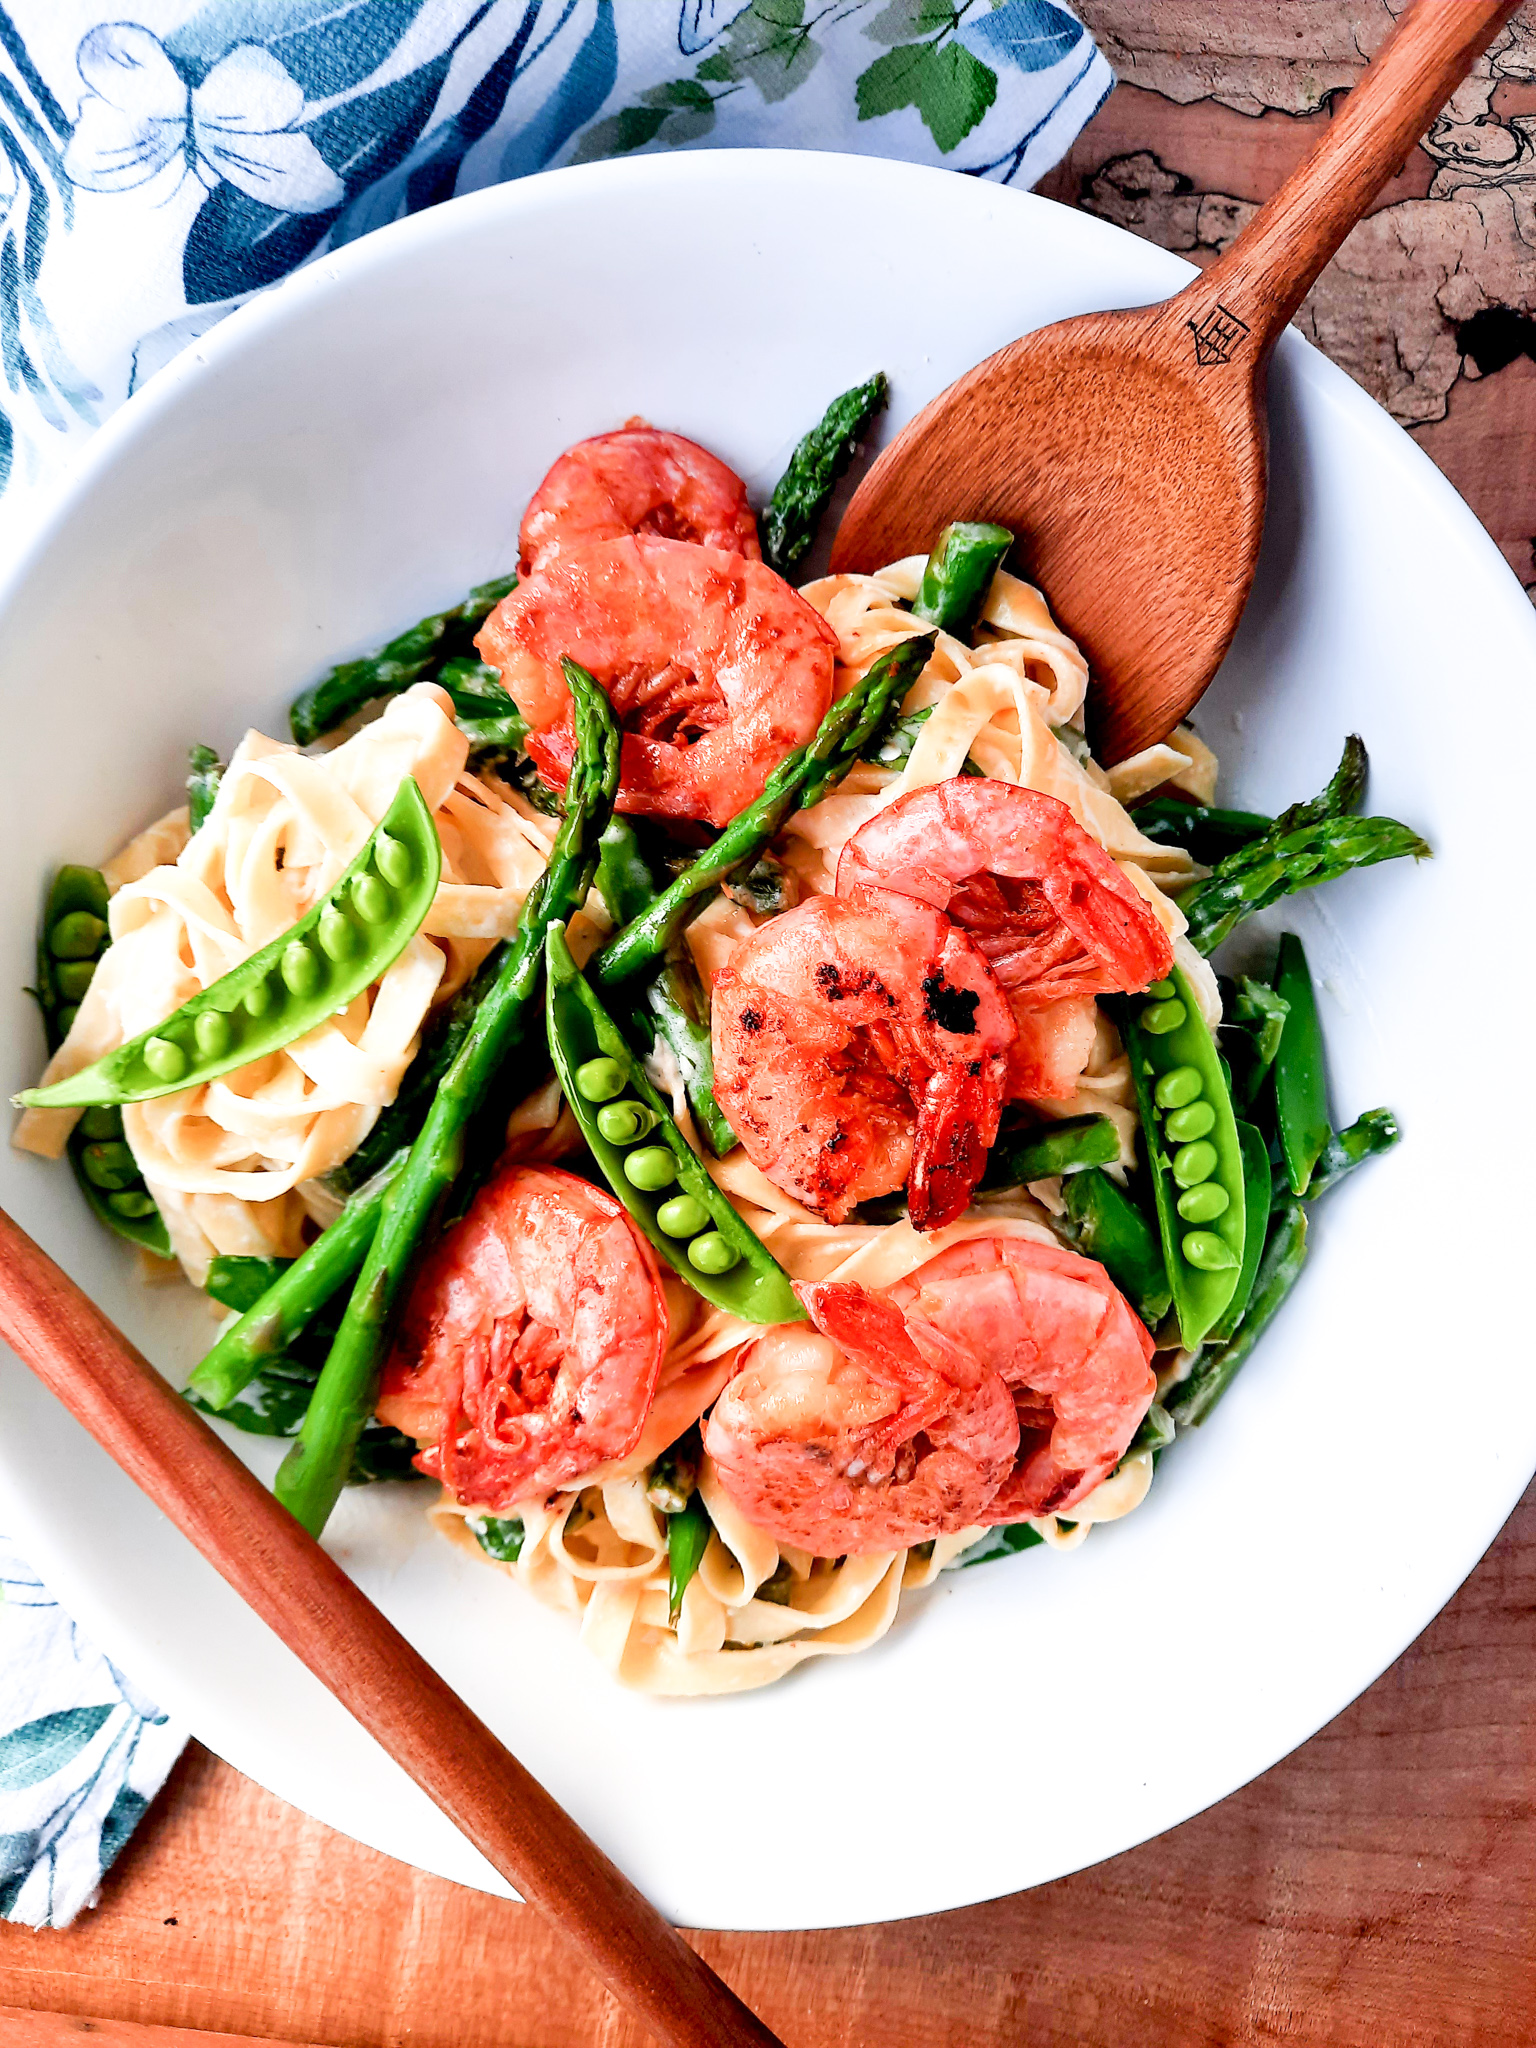 Creamy Spring Pasta with Shrimp combines first of the season asparagus and peas in a cream based sauce with tender garlic shrimp.